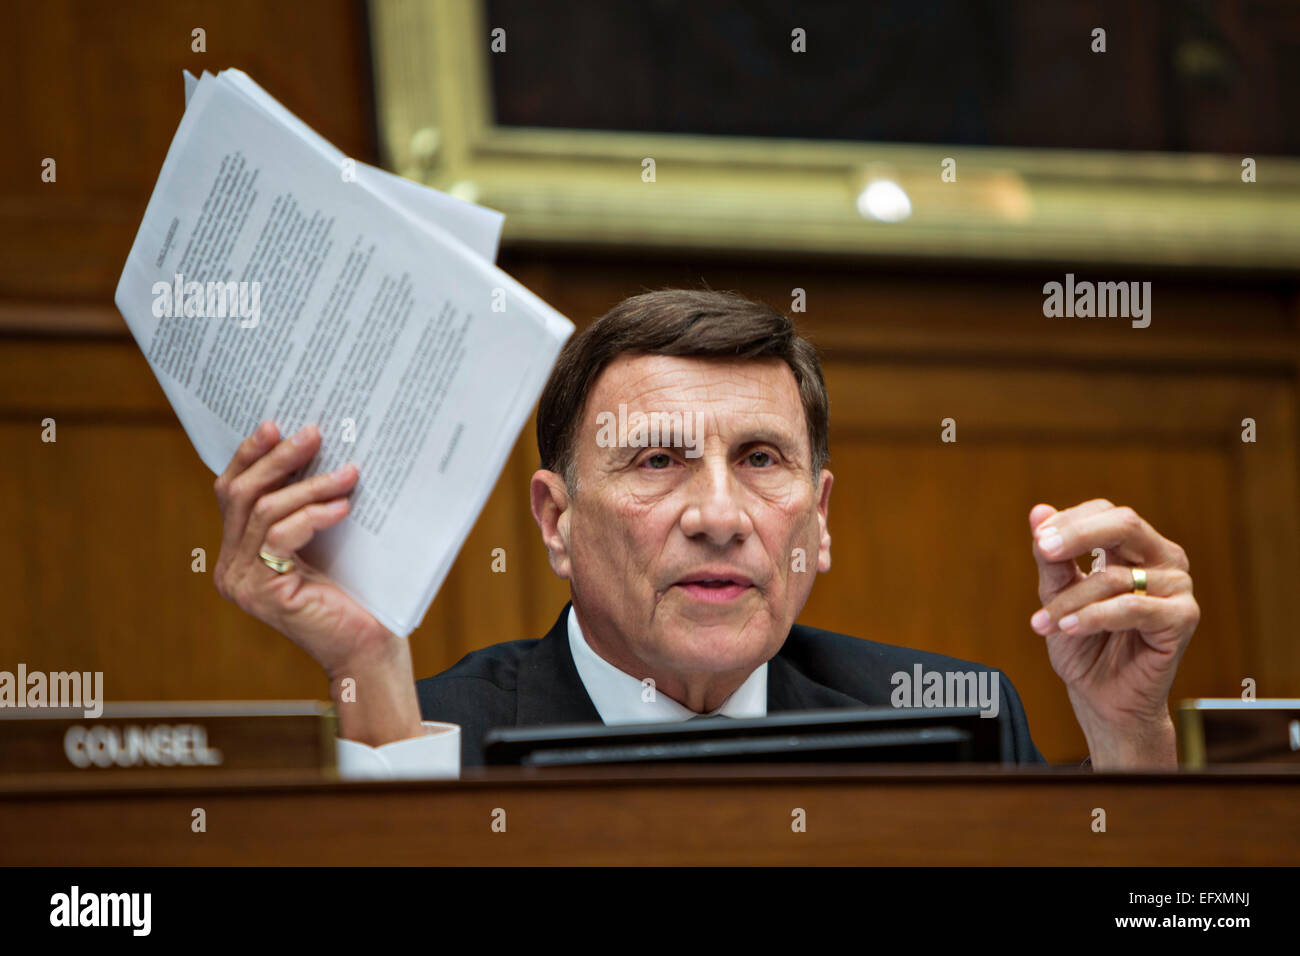 Congressmen John Mica questions a witness during the House Oversight and Government Reform Committee hearing on the Benghazi attack on Capitol Hill May 8, 2013 in Washington, DC. Stock Photo